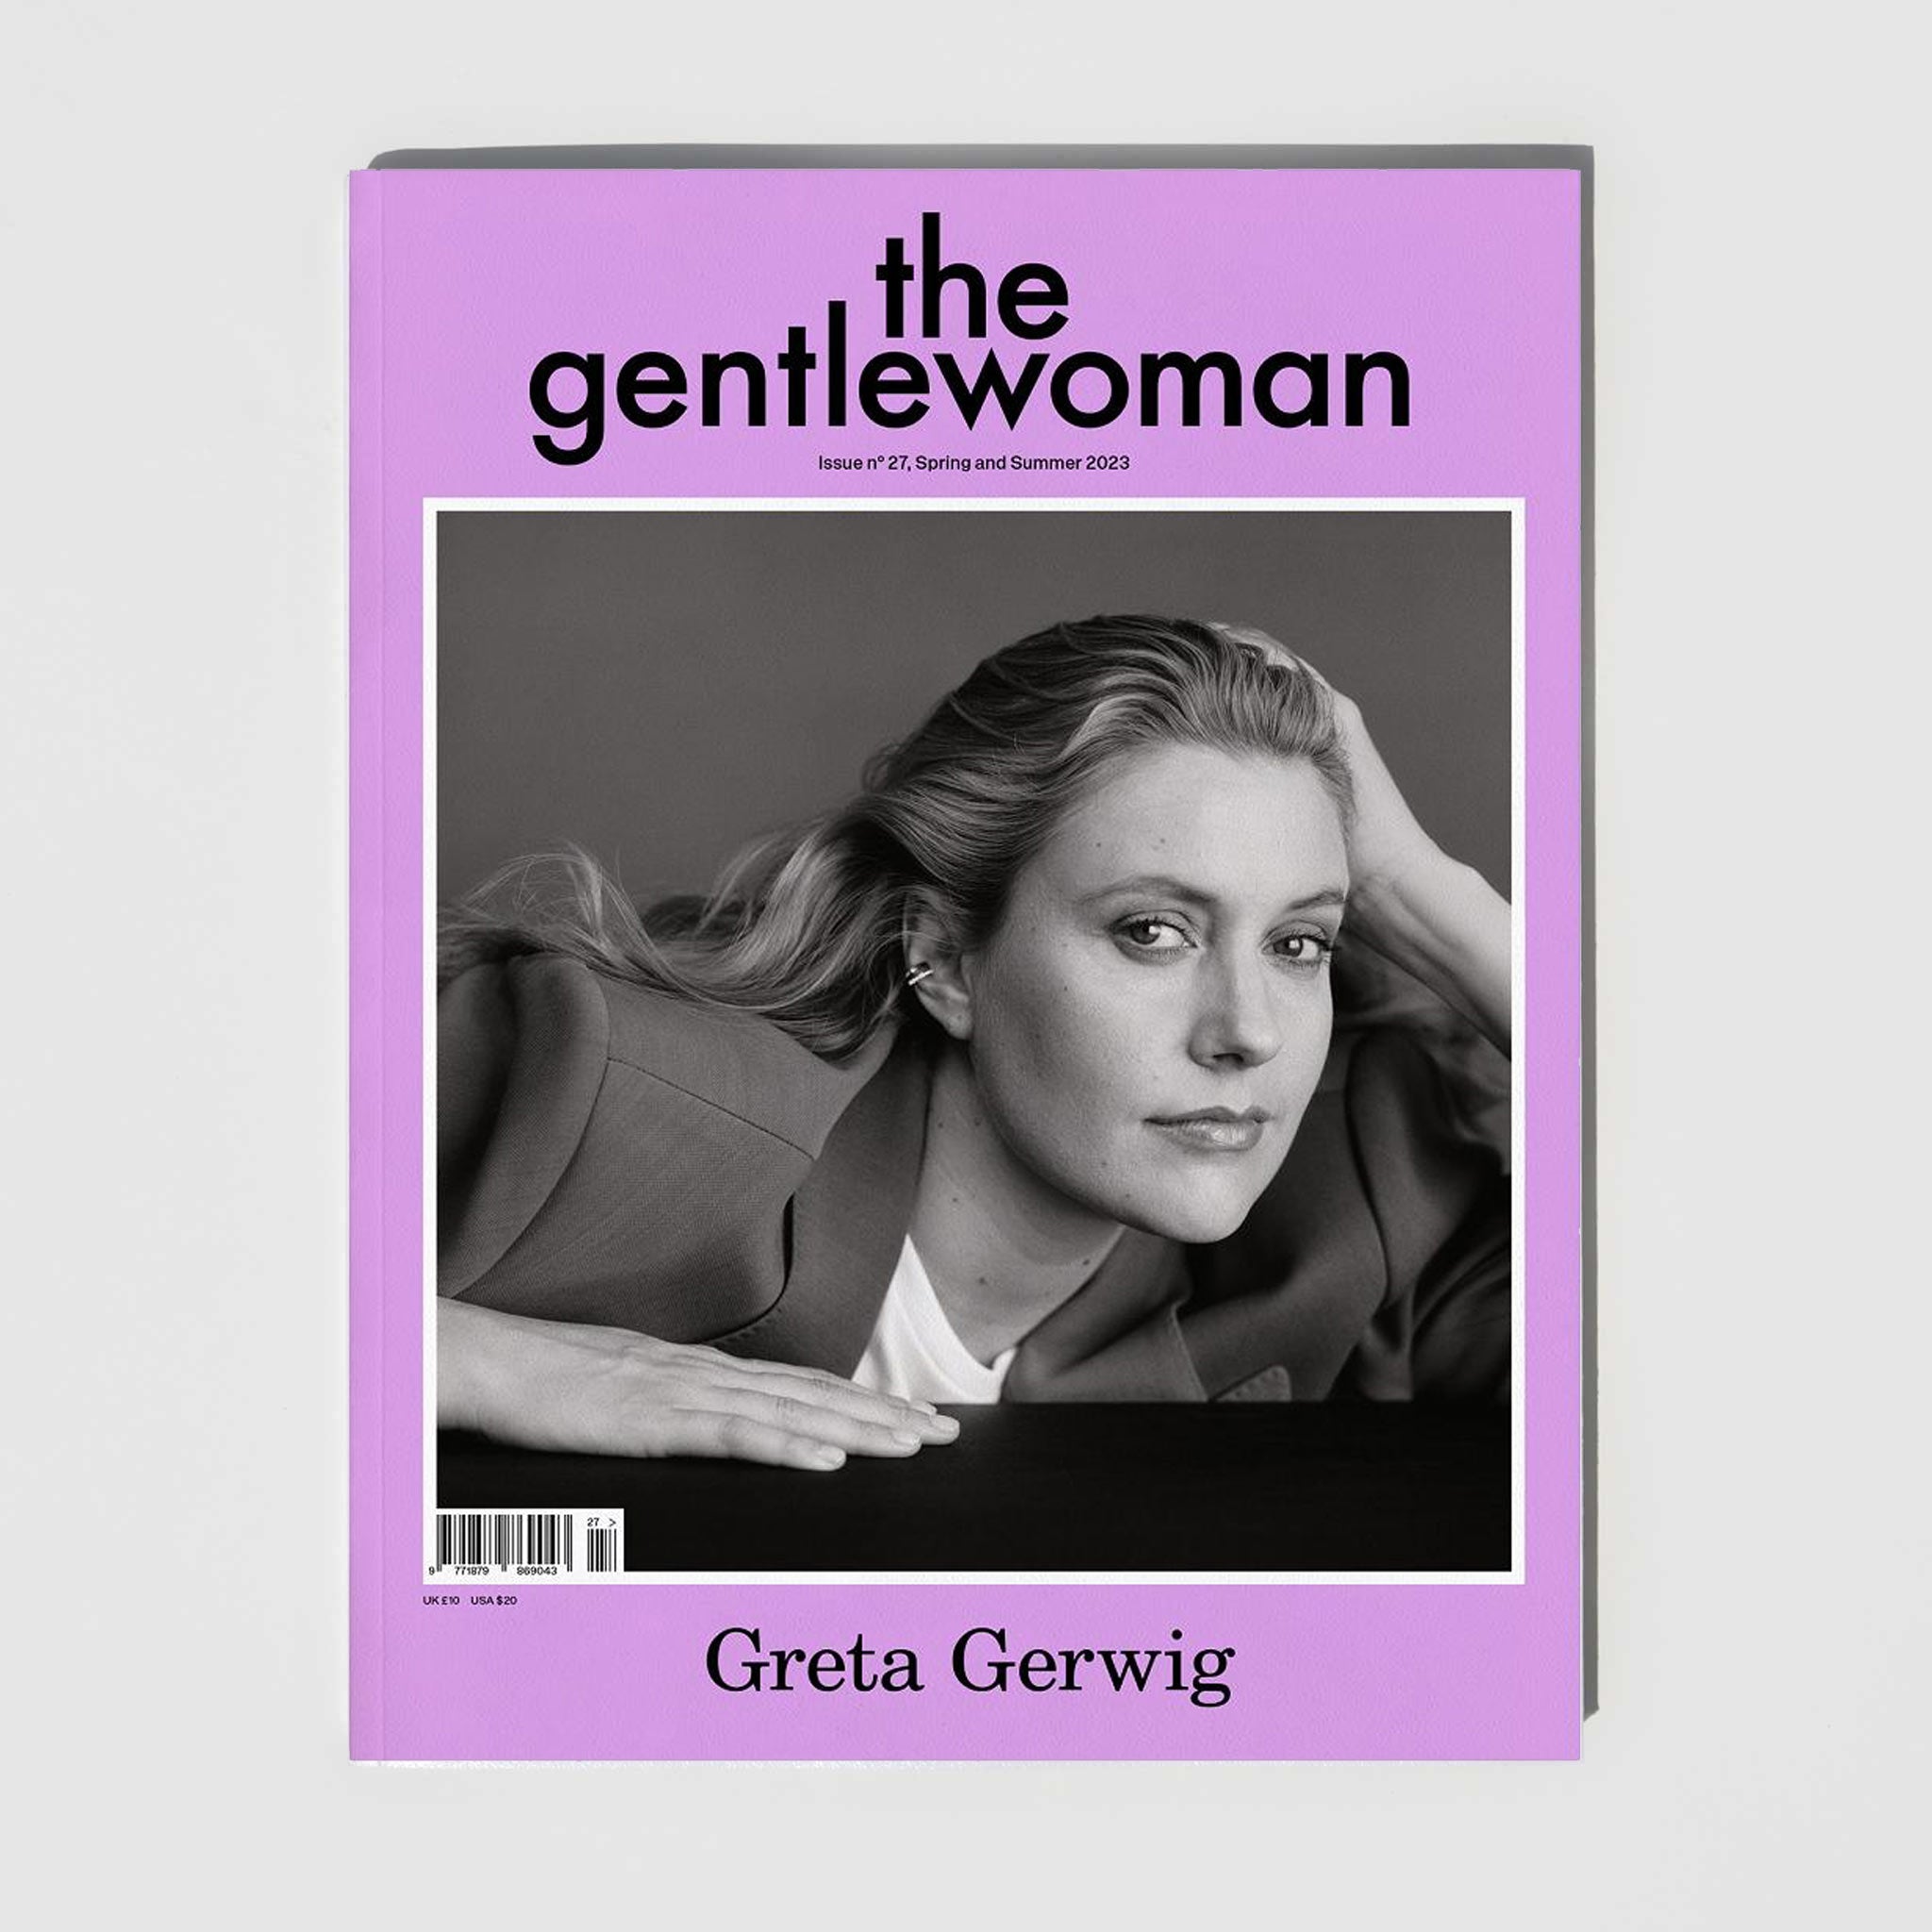 Cover image of The Gentlewoman magazine, issue 27 featuring Greta Gerwig.